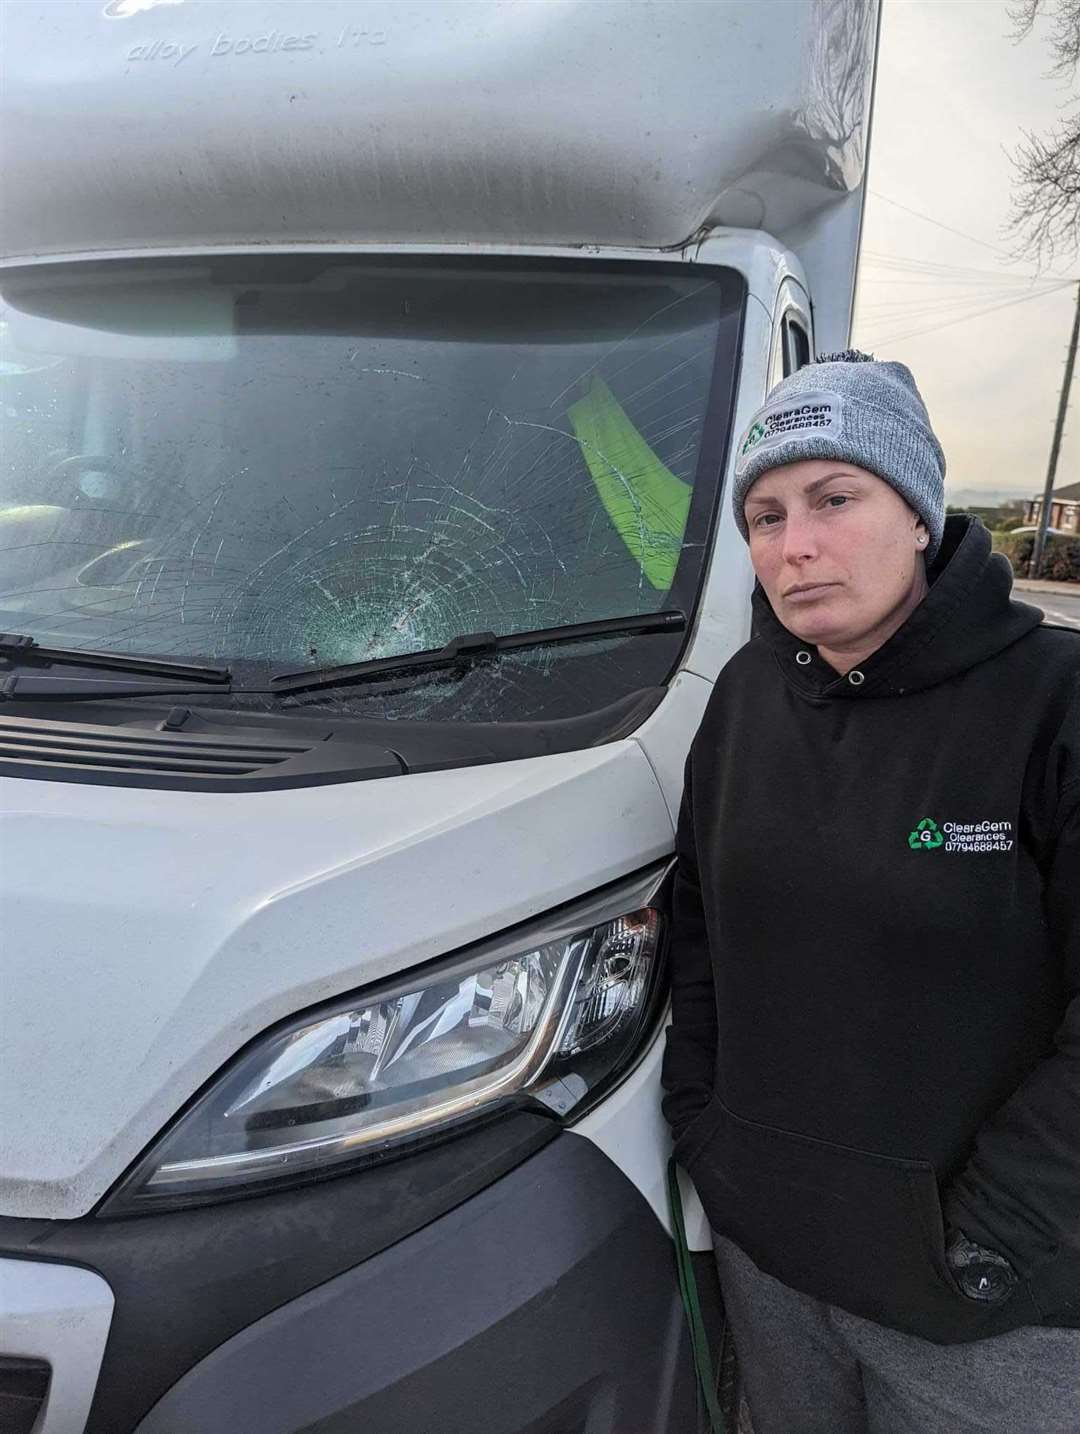 ClearaGem company director, Gemma Phillips with her damaged Luton van. Picture: Gemma Phillips